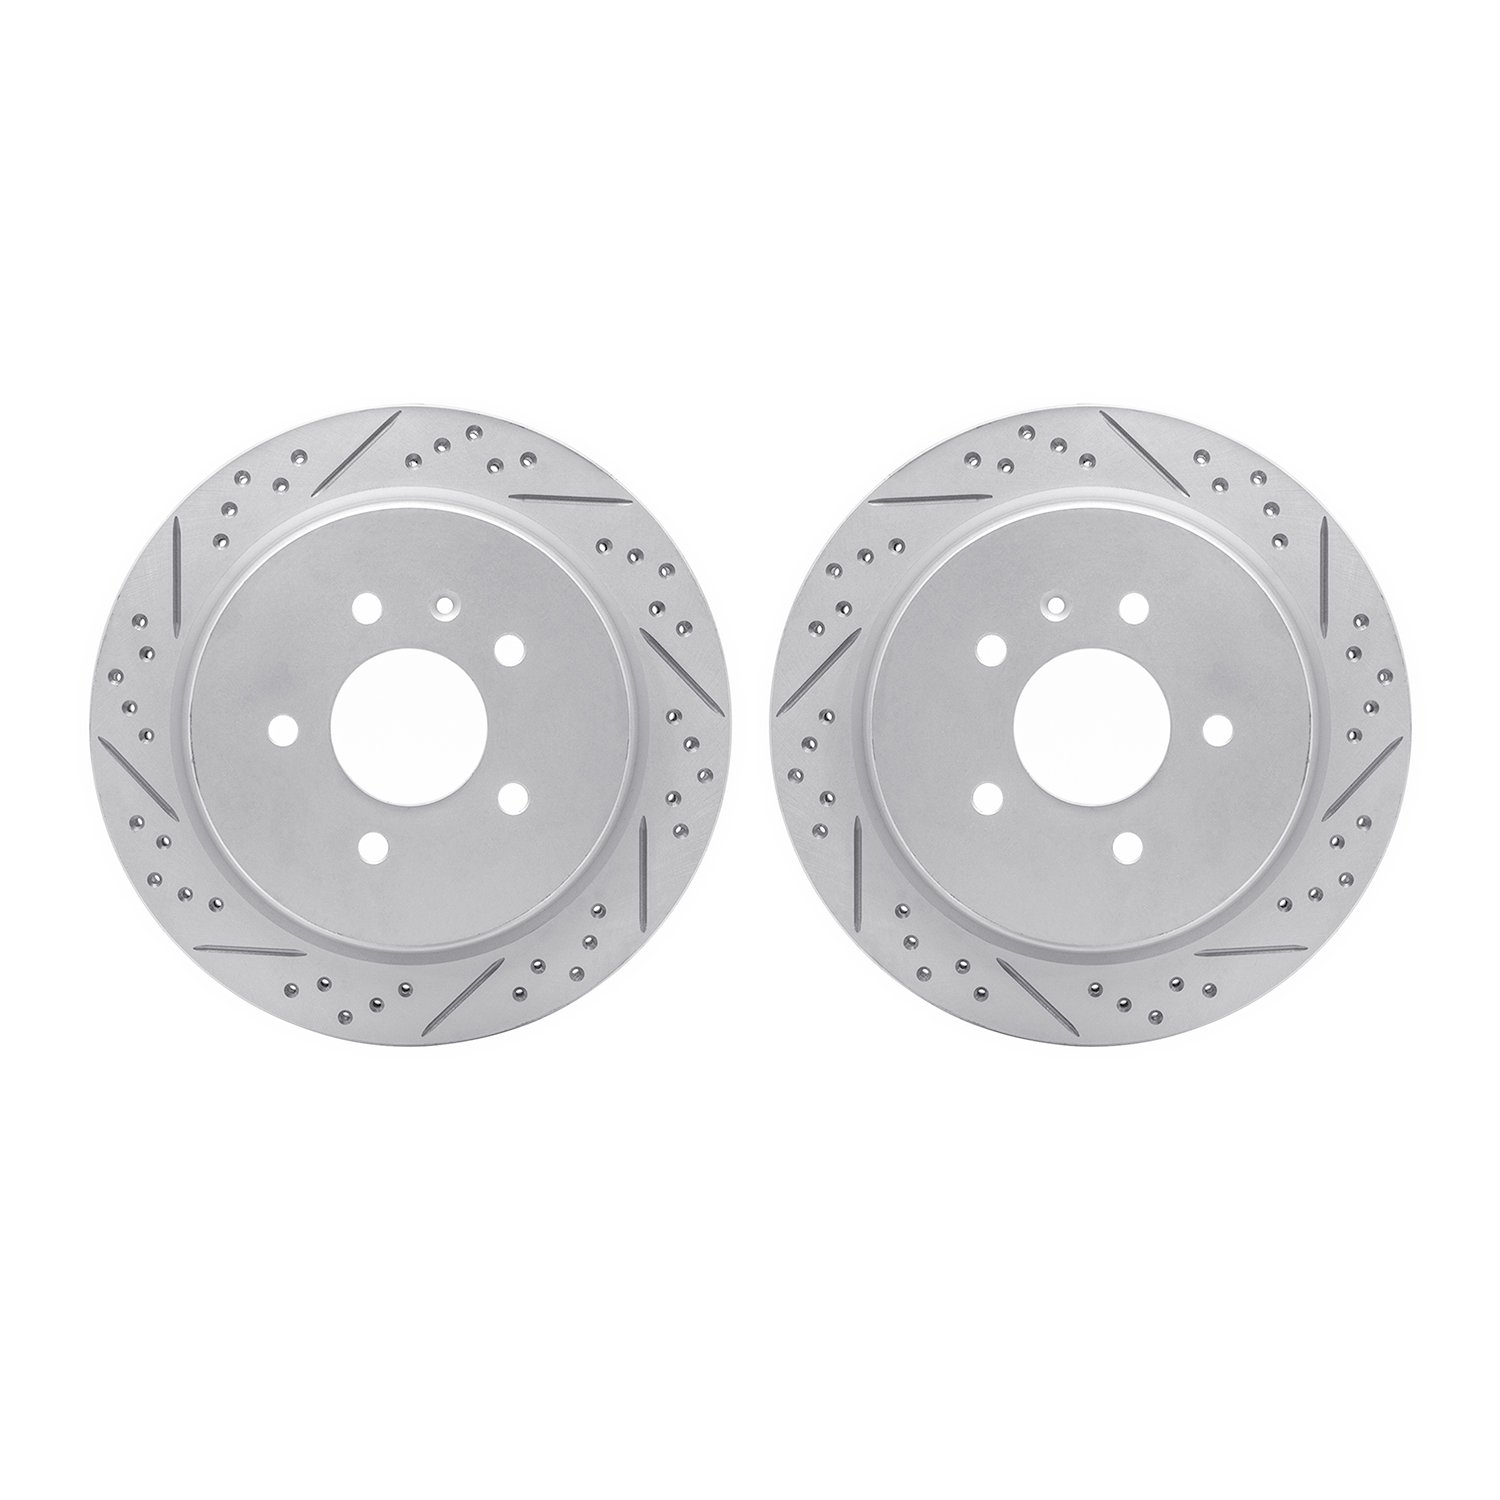 2002-46027 Geoperformance Drilled/Slotted Brake Rotors, 2003-2011 GM, Position: Rear